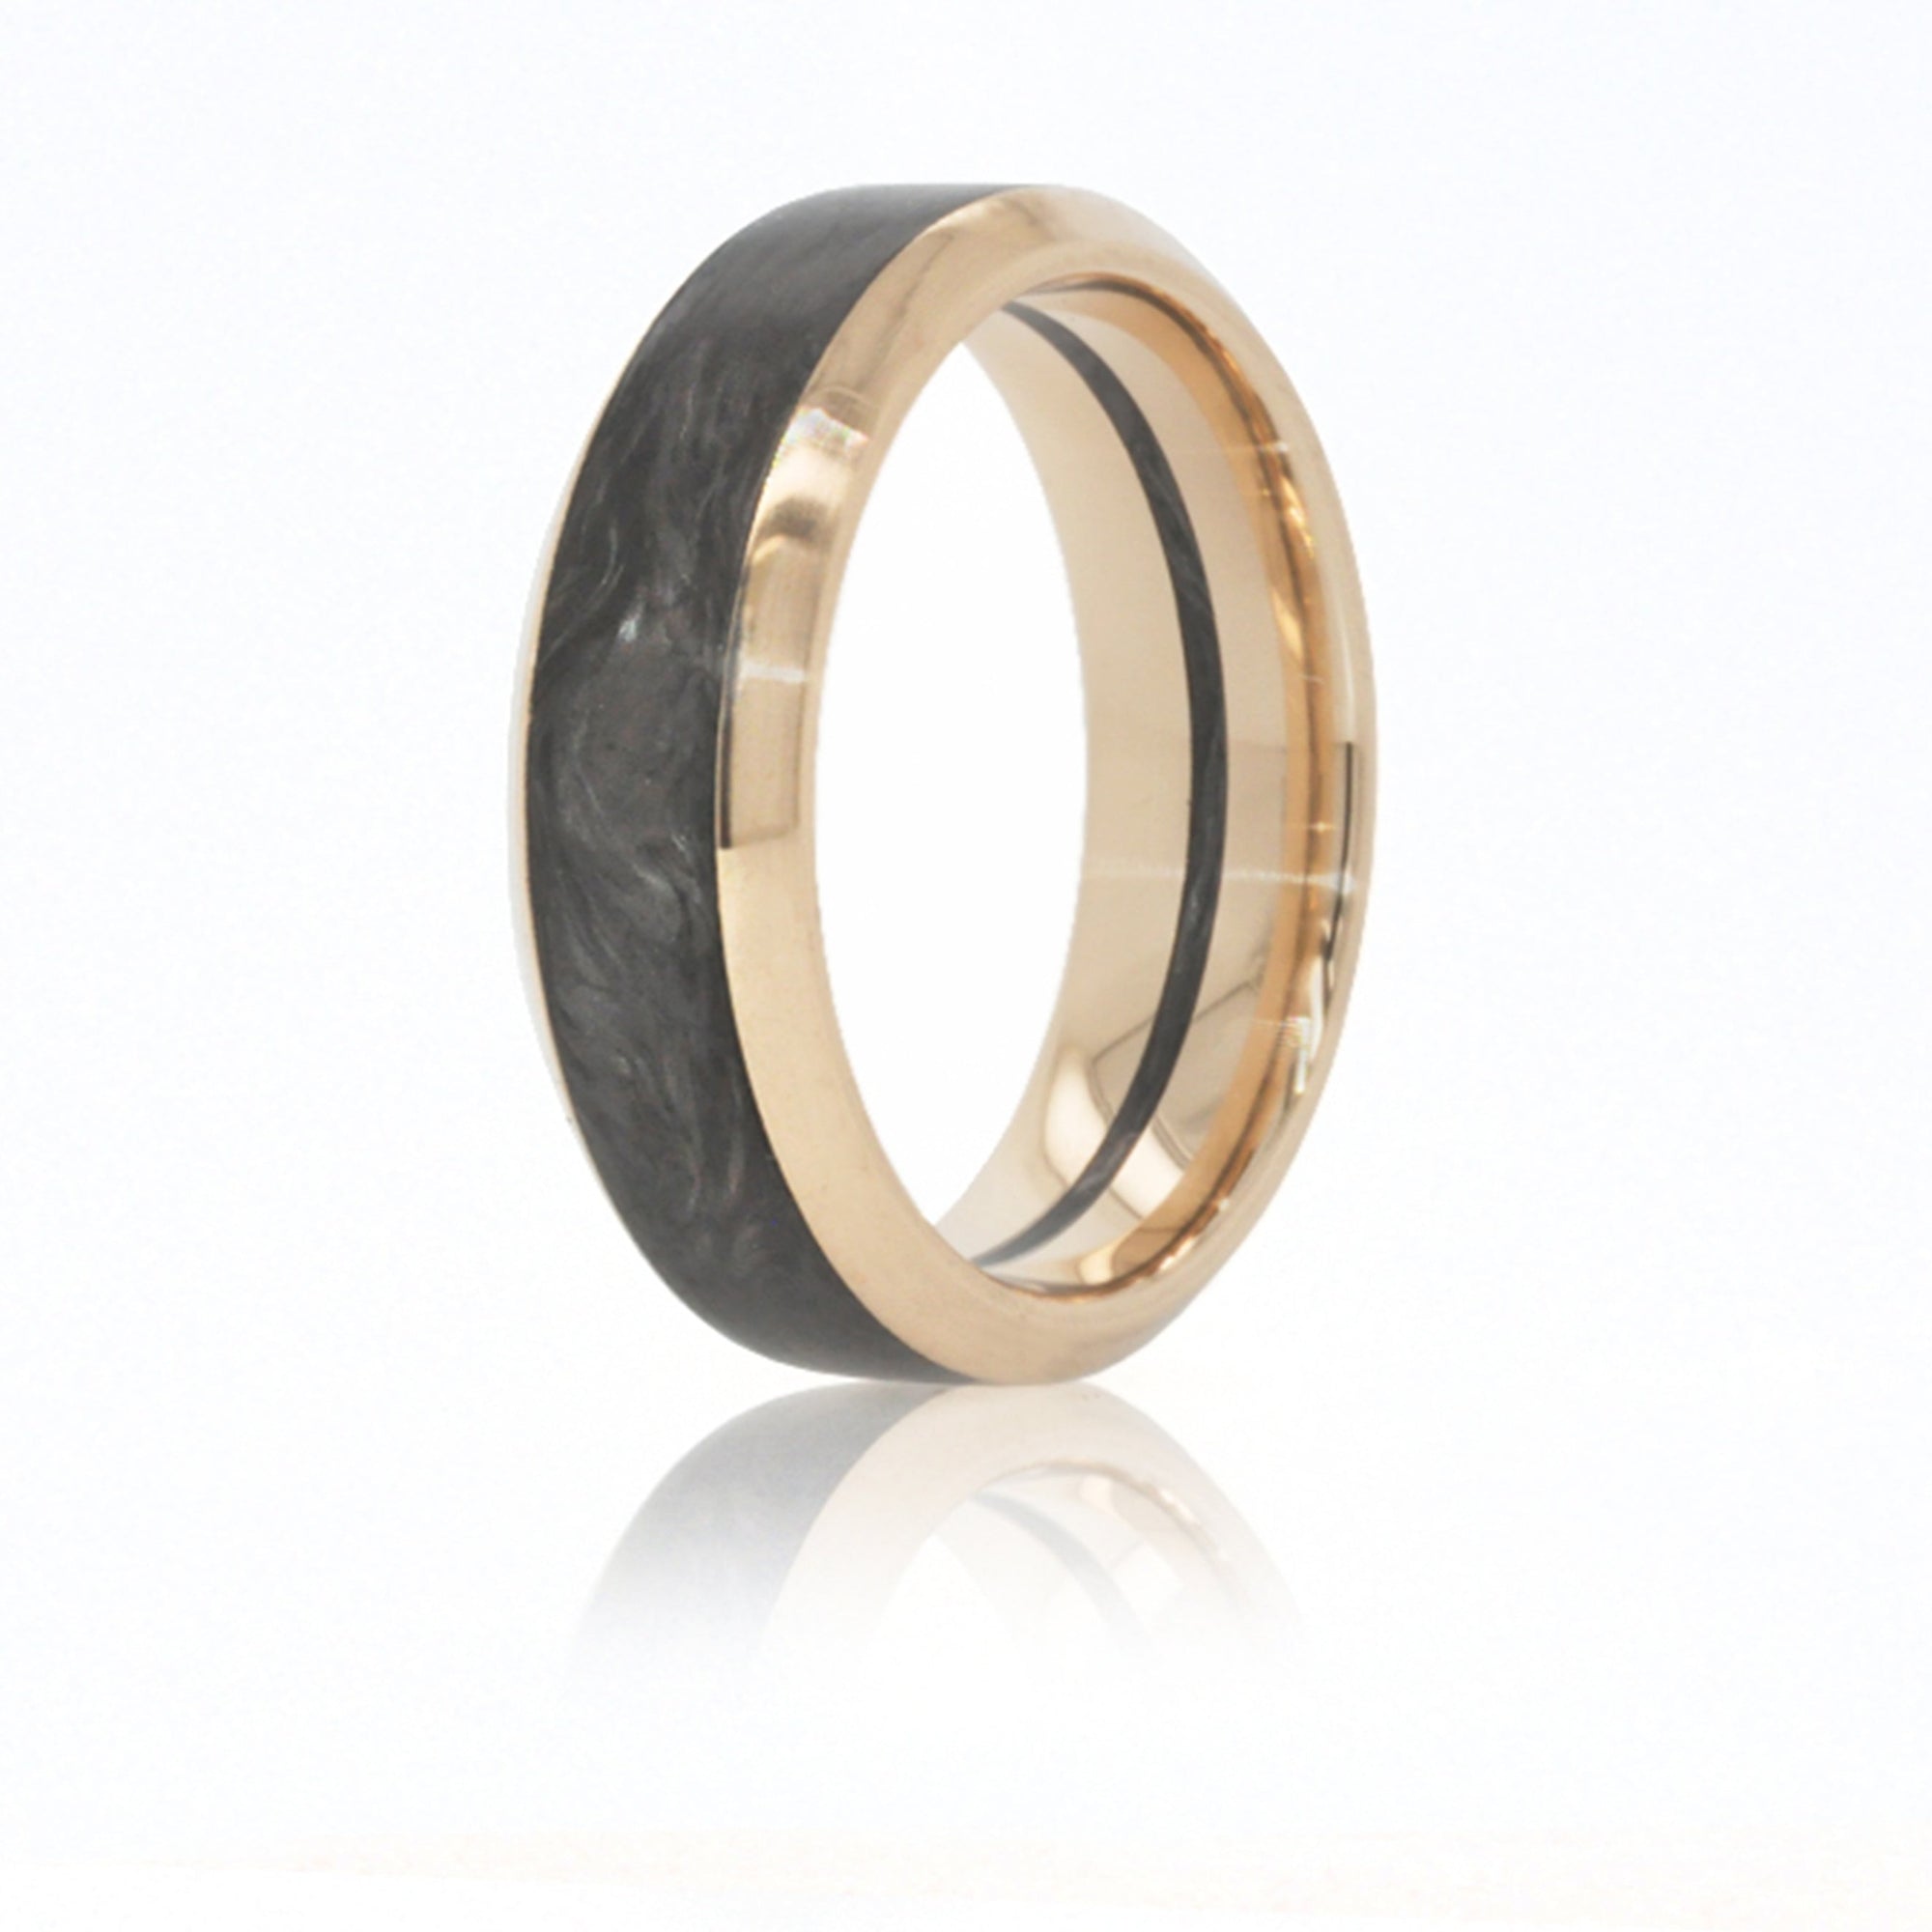 Wedding Band featuring a forged carbon fiber exterior with yellow gold edging, and a Yellow Gold interior with center Forged Carbon Fiber stripe.